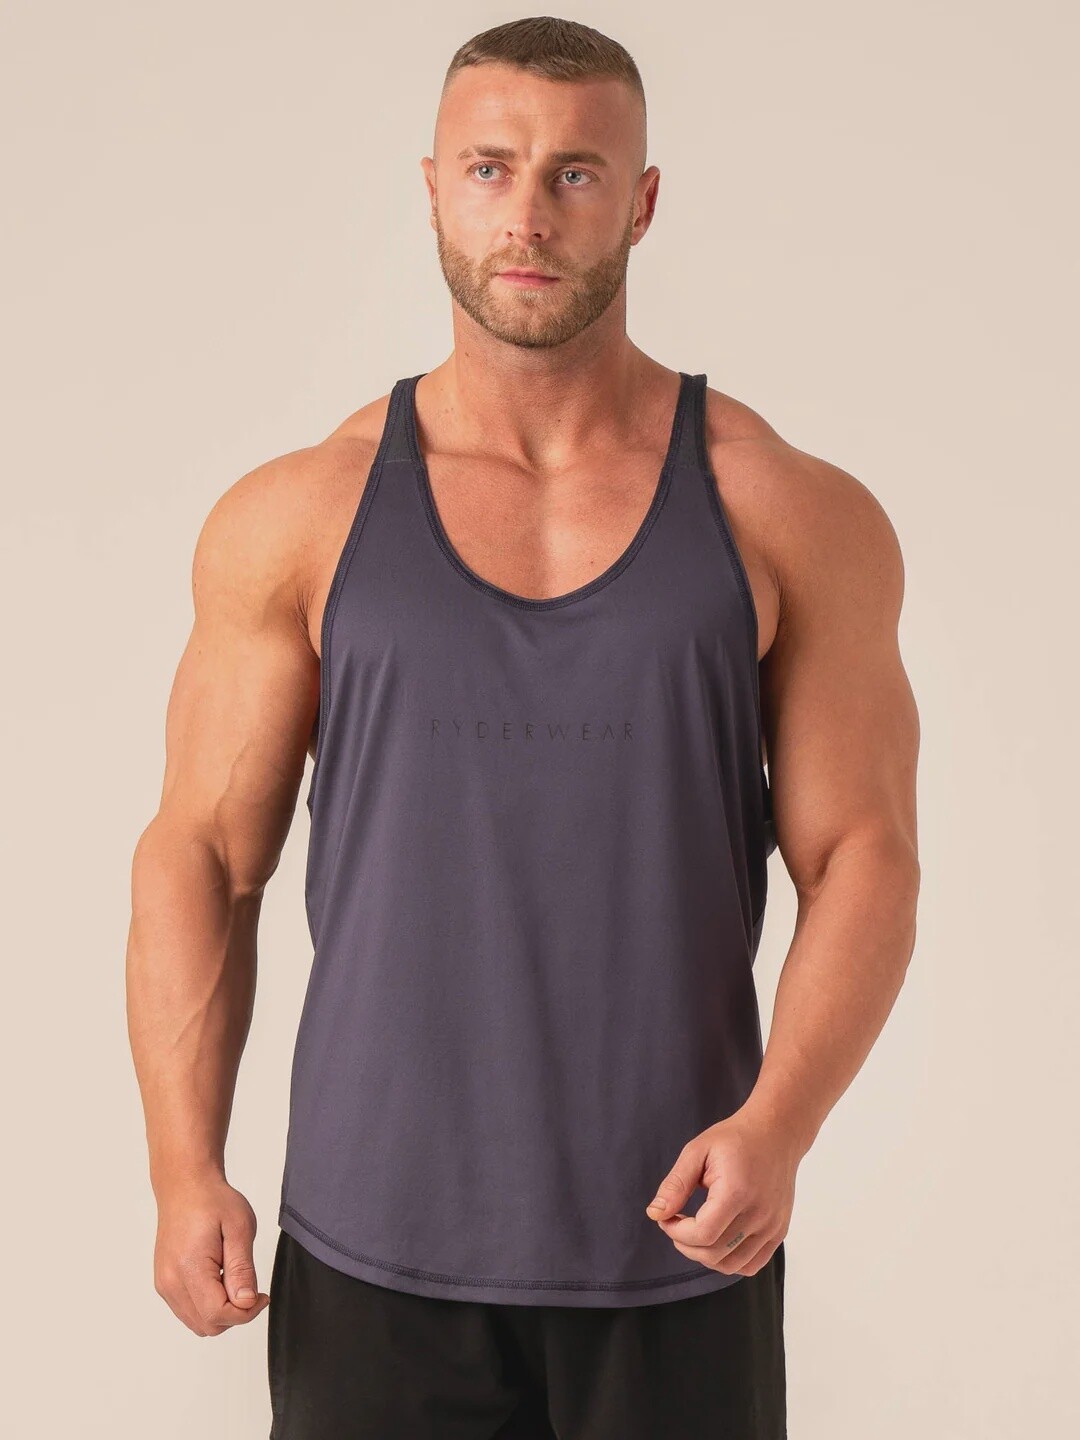 T-back - Charcoal (Ryderwear), Size: S